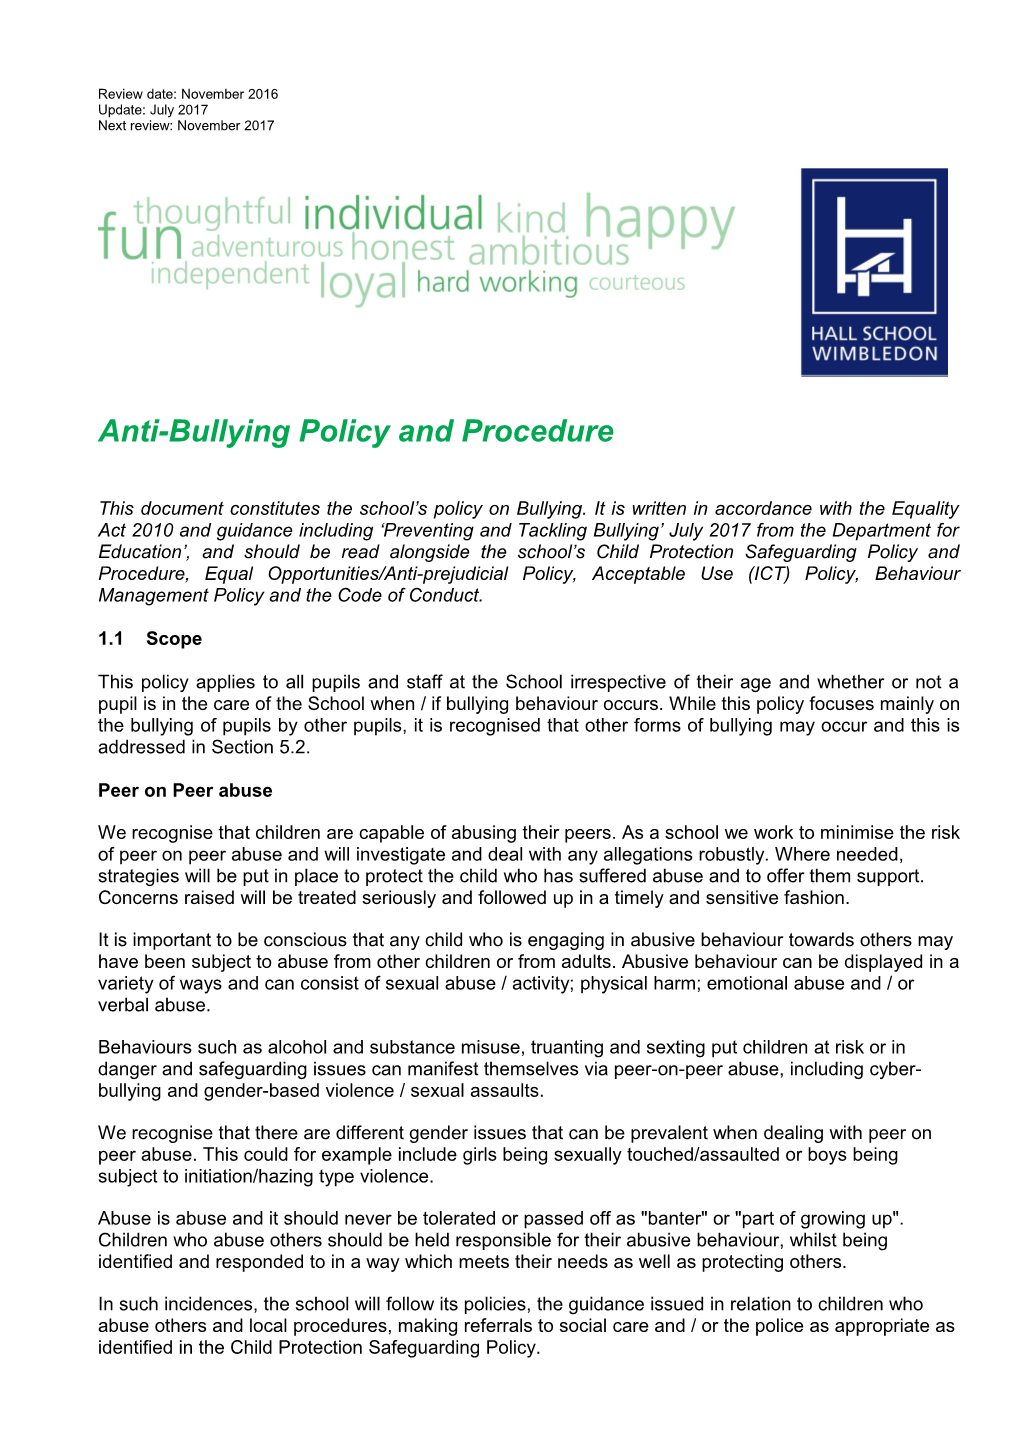 Anti-Bullying Policy and Procedure